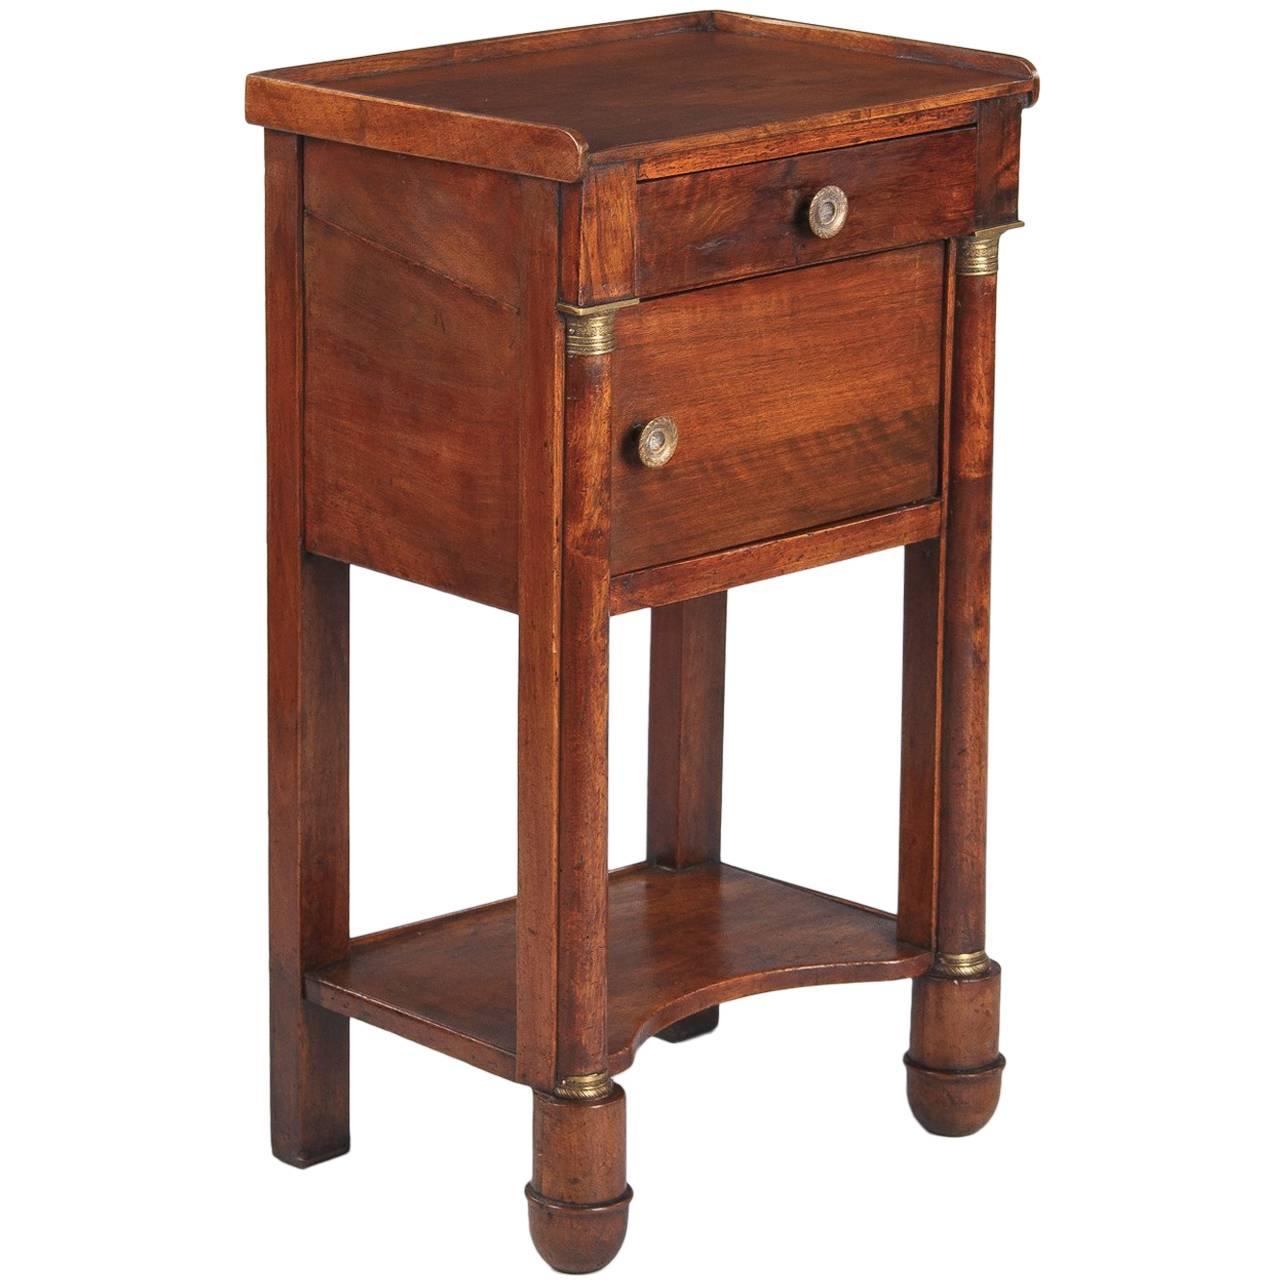 French Empire Period Walnut Bedside Cabinet, Early 1800s